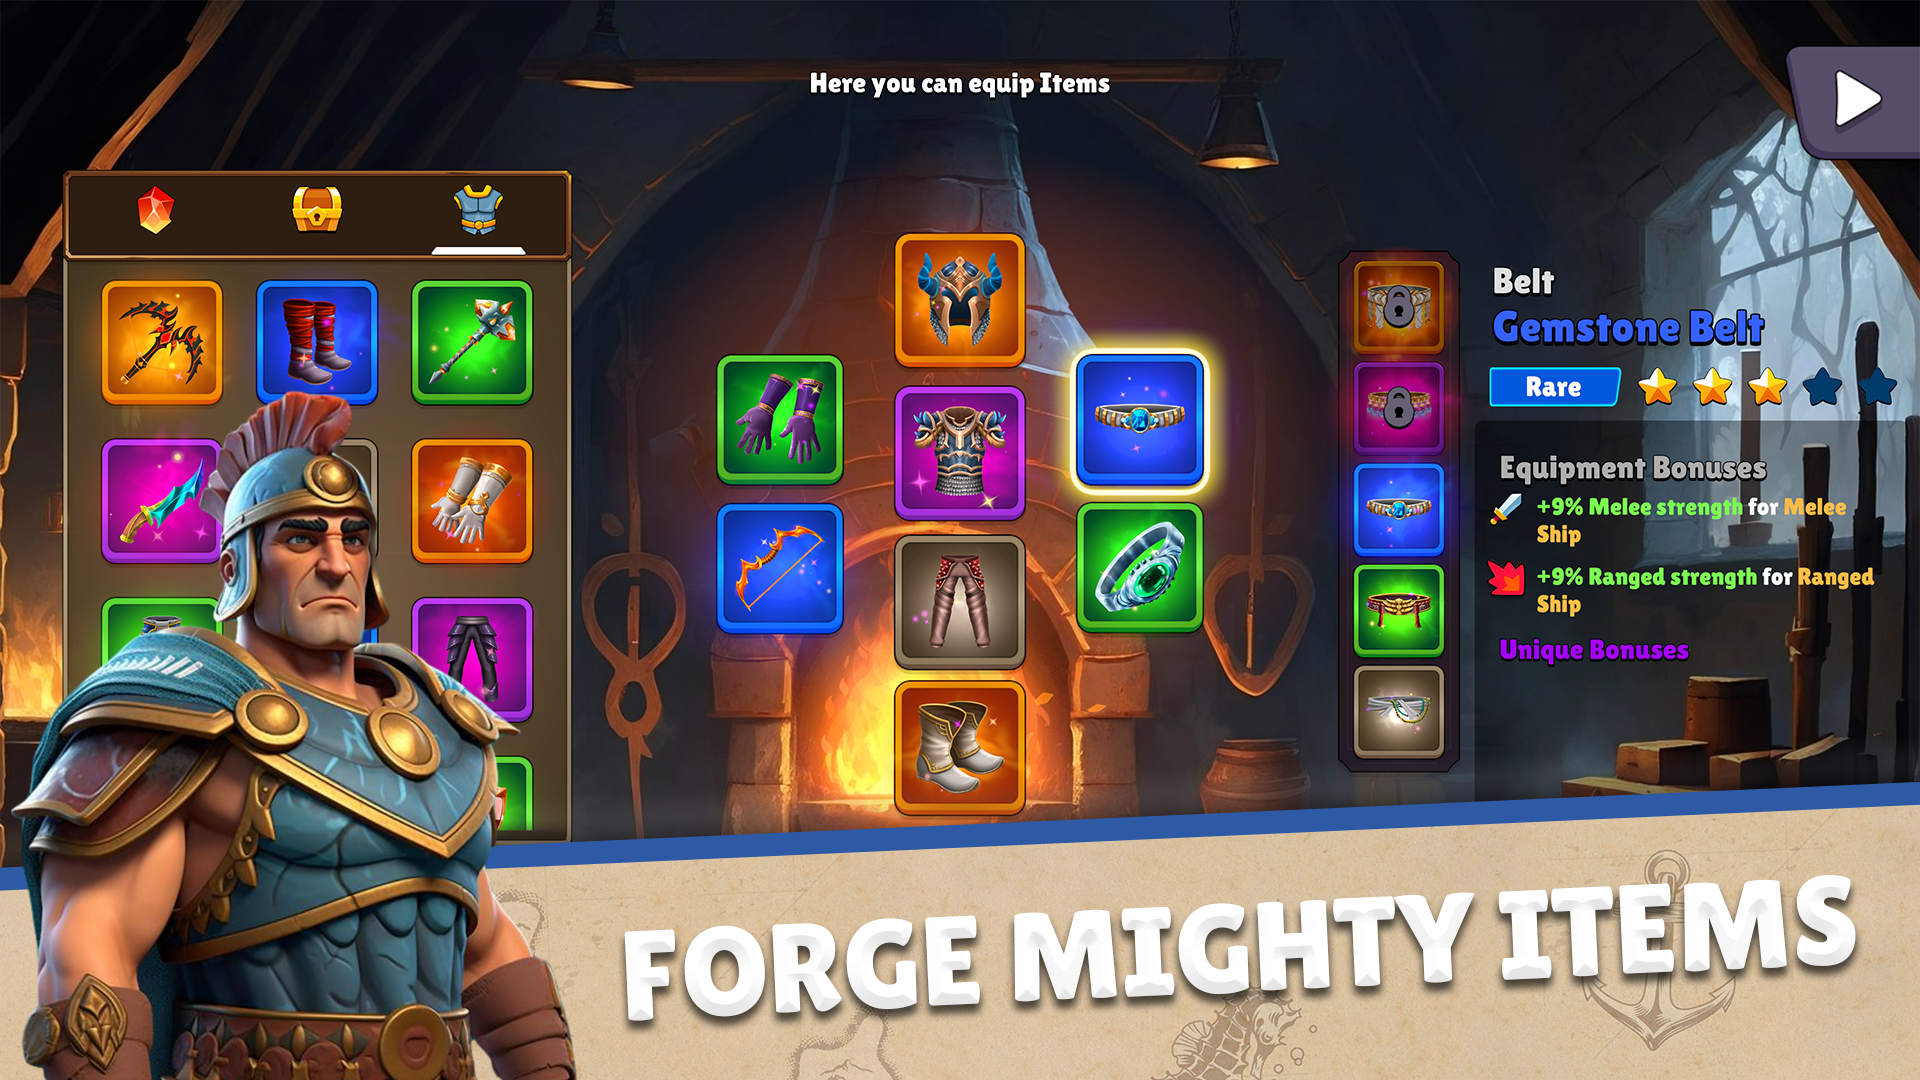 A glowing blacksmith for forging mighty equipment